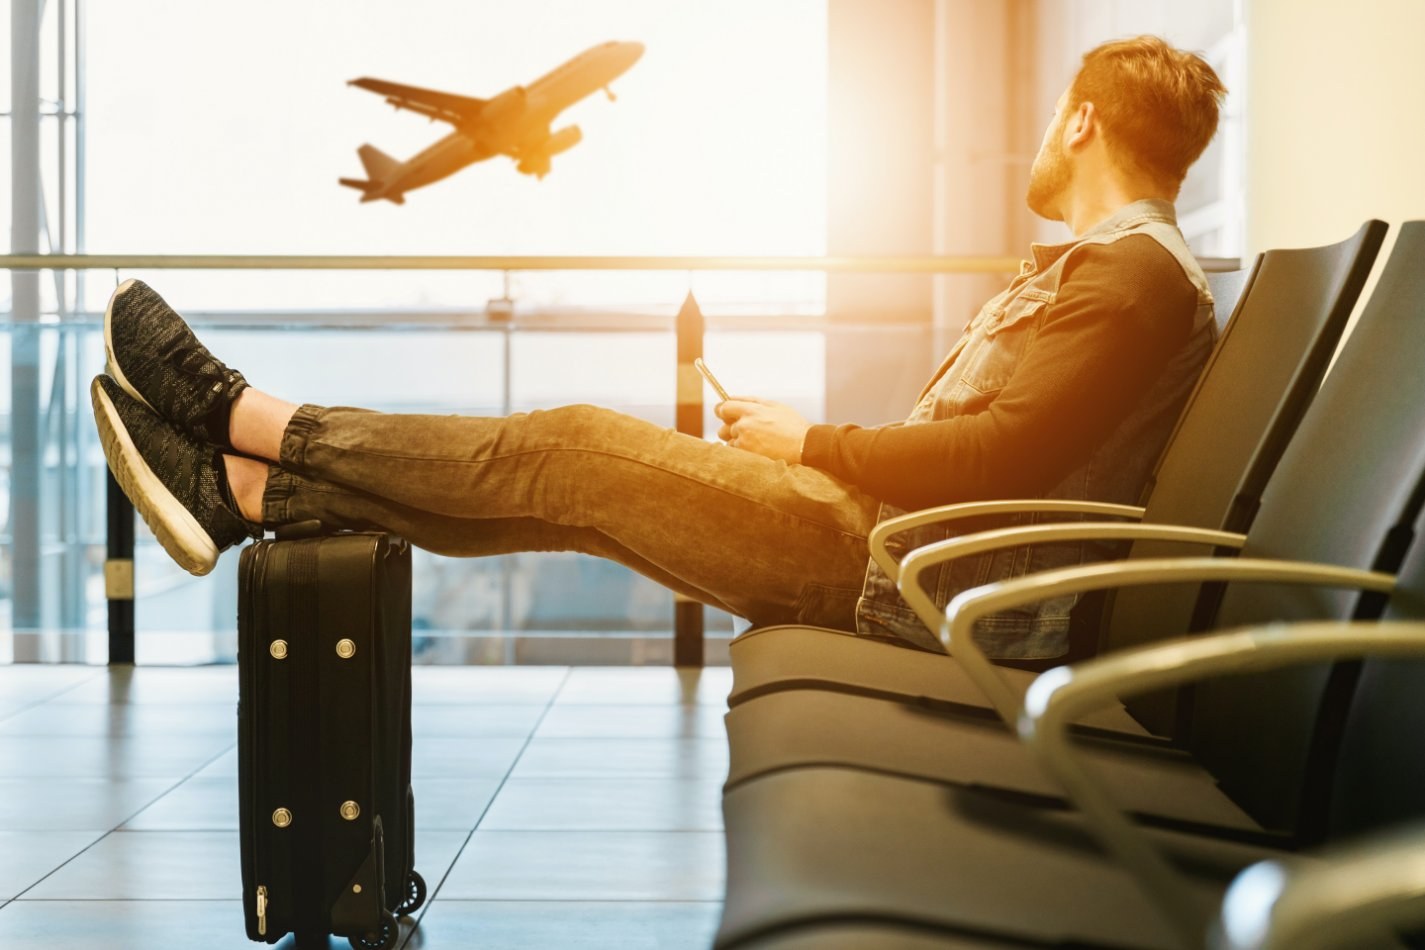 man at airport with feet on suitcase looking outside at plane taking off